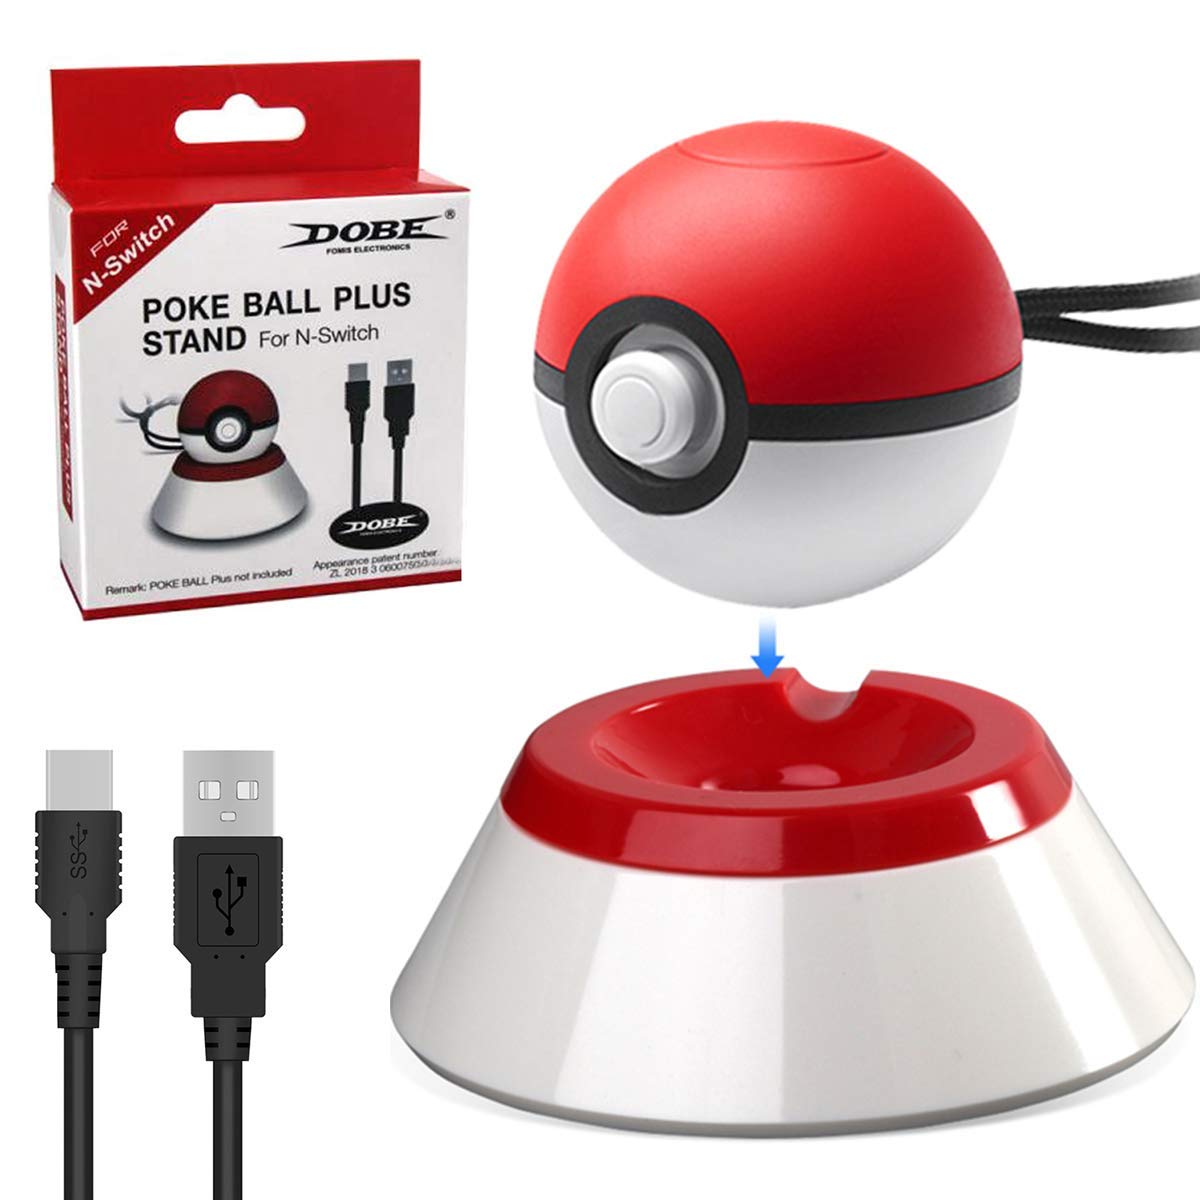 does the pokeball plus come with a charger